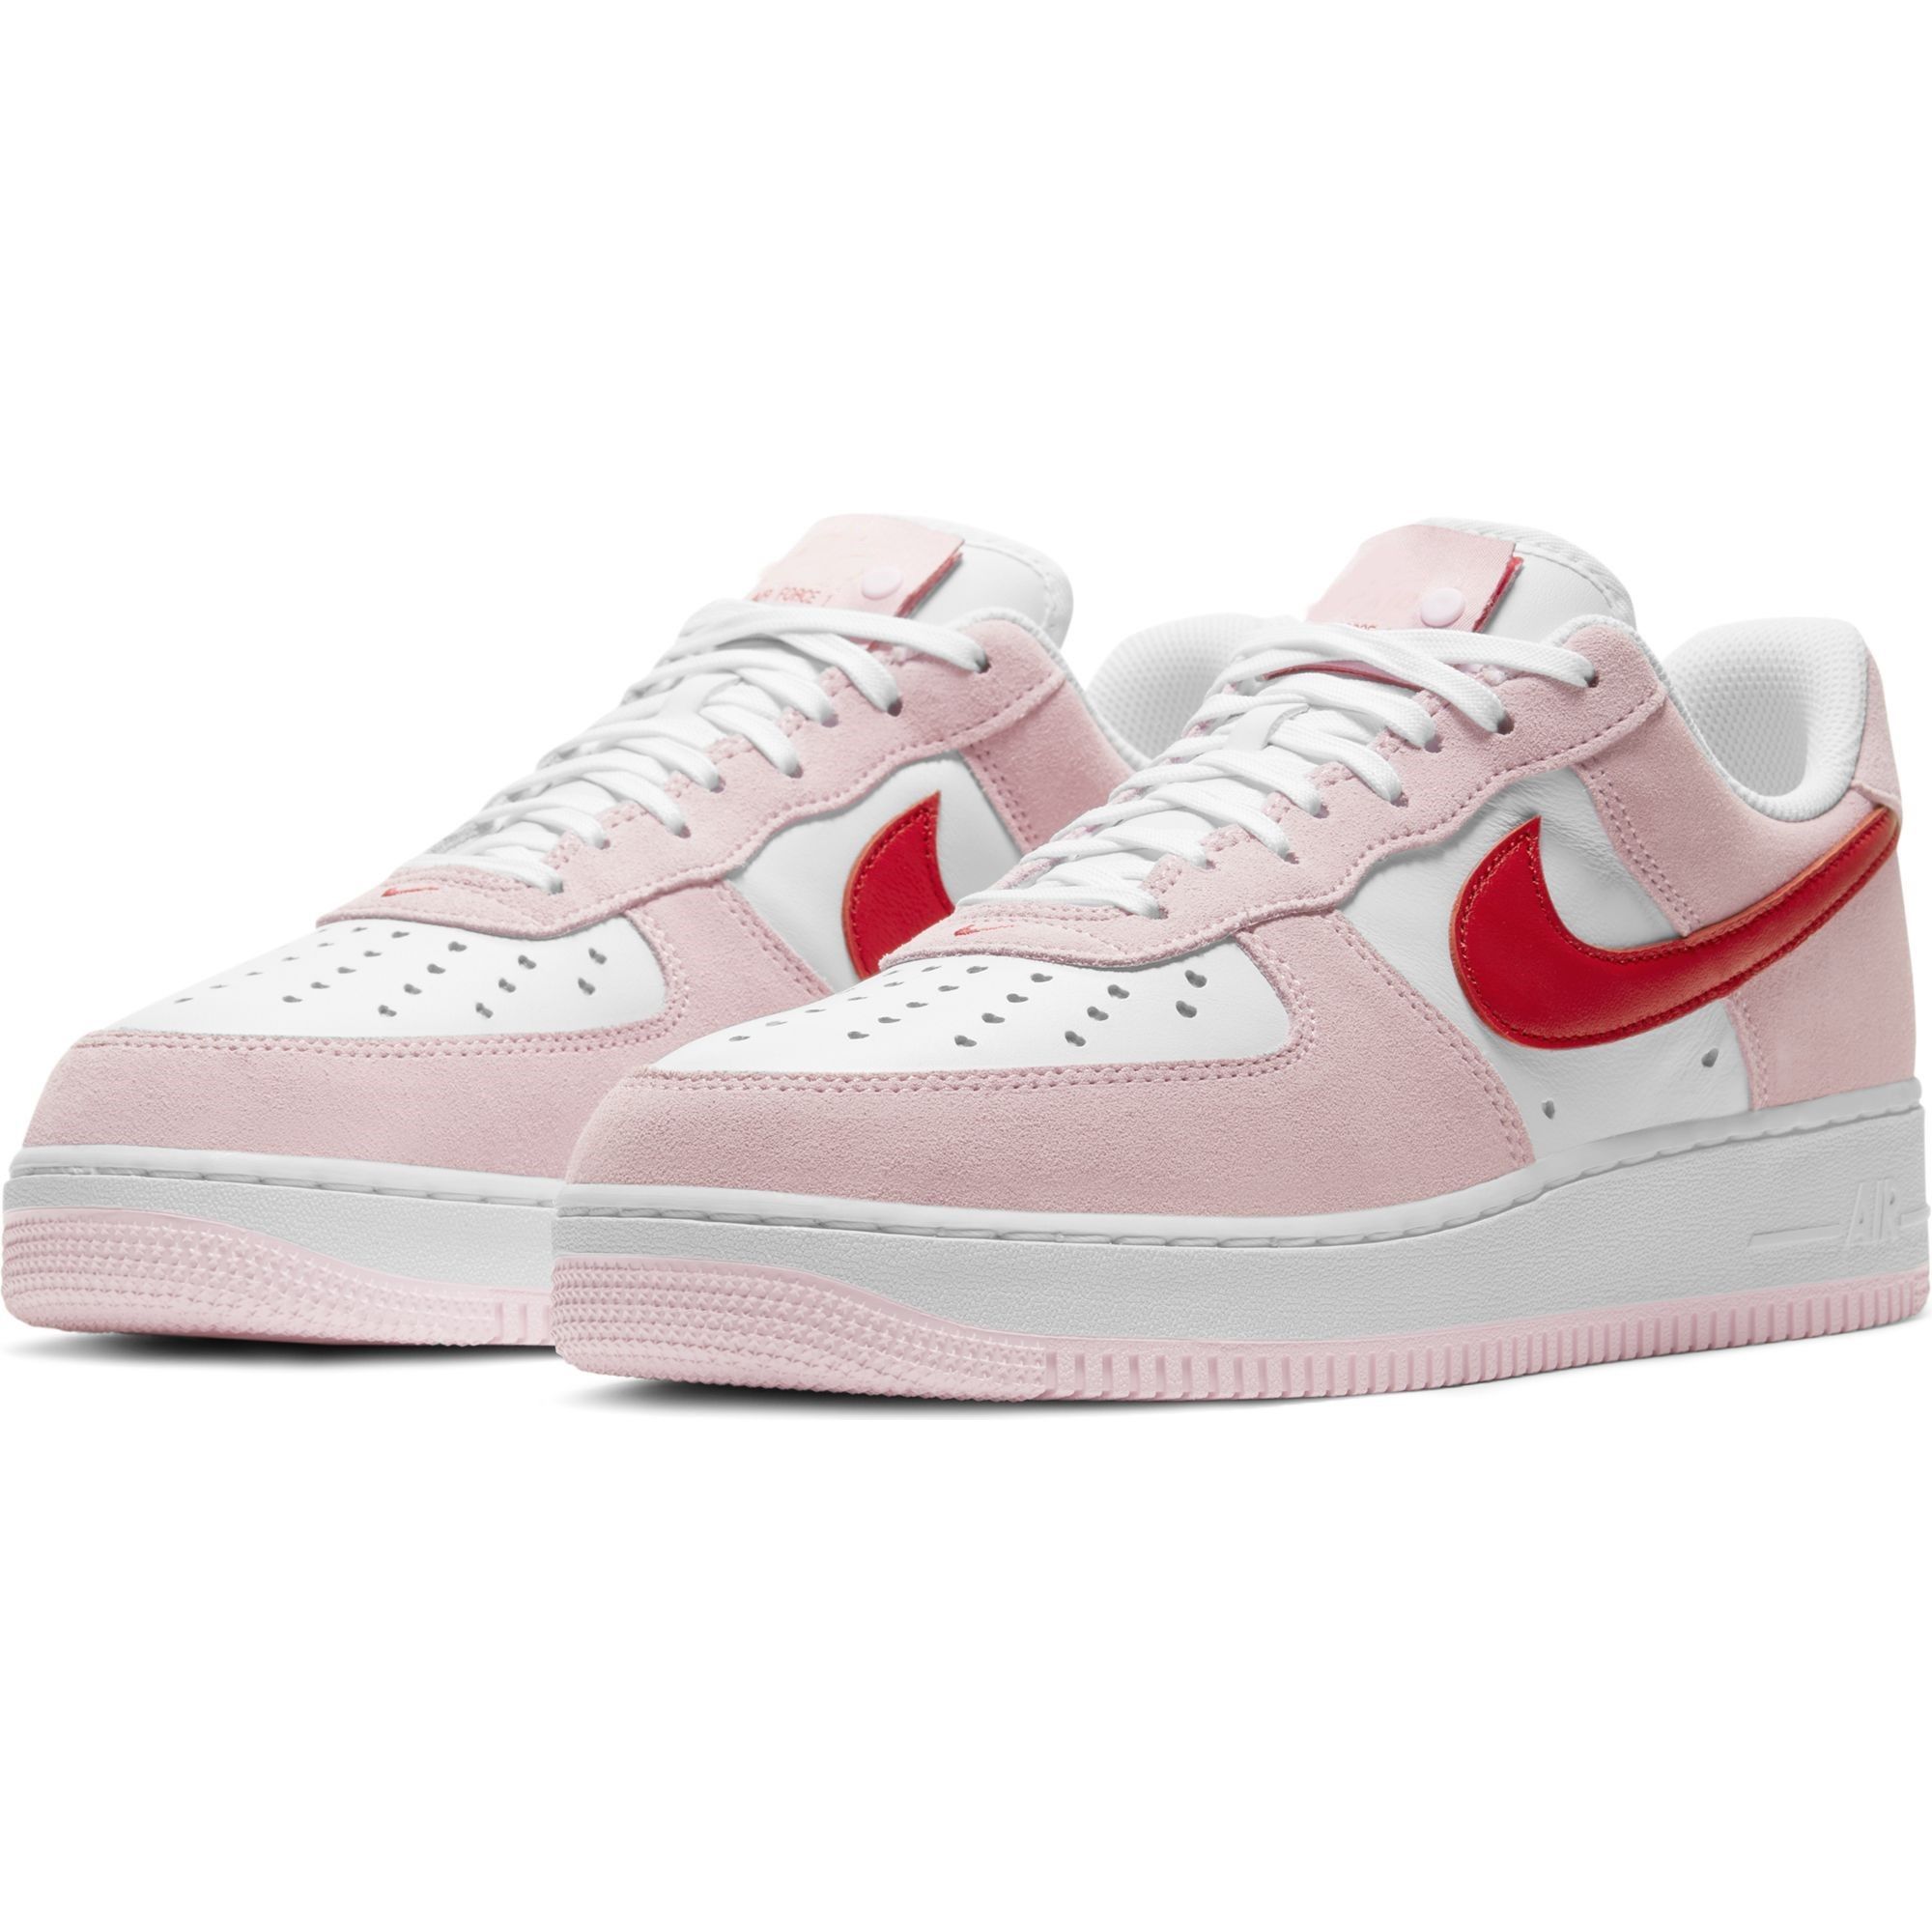 Nike air valentines day. Кроссовки Air Force Nike 1 07 QS Valentine’s Day Love Letter. Nike Air Force 1 07 QS. Nike Air Force 1 Low “Valentine’s Day” 2023. Nike Air Force 1’07 “Valentines Day” (2021).